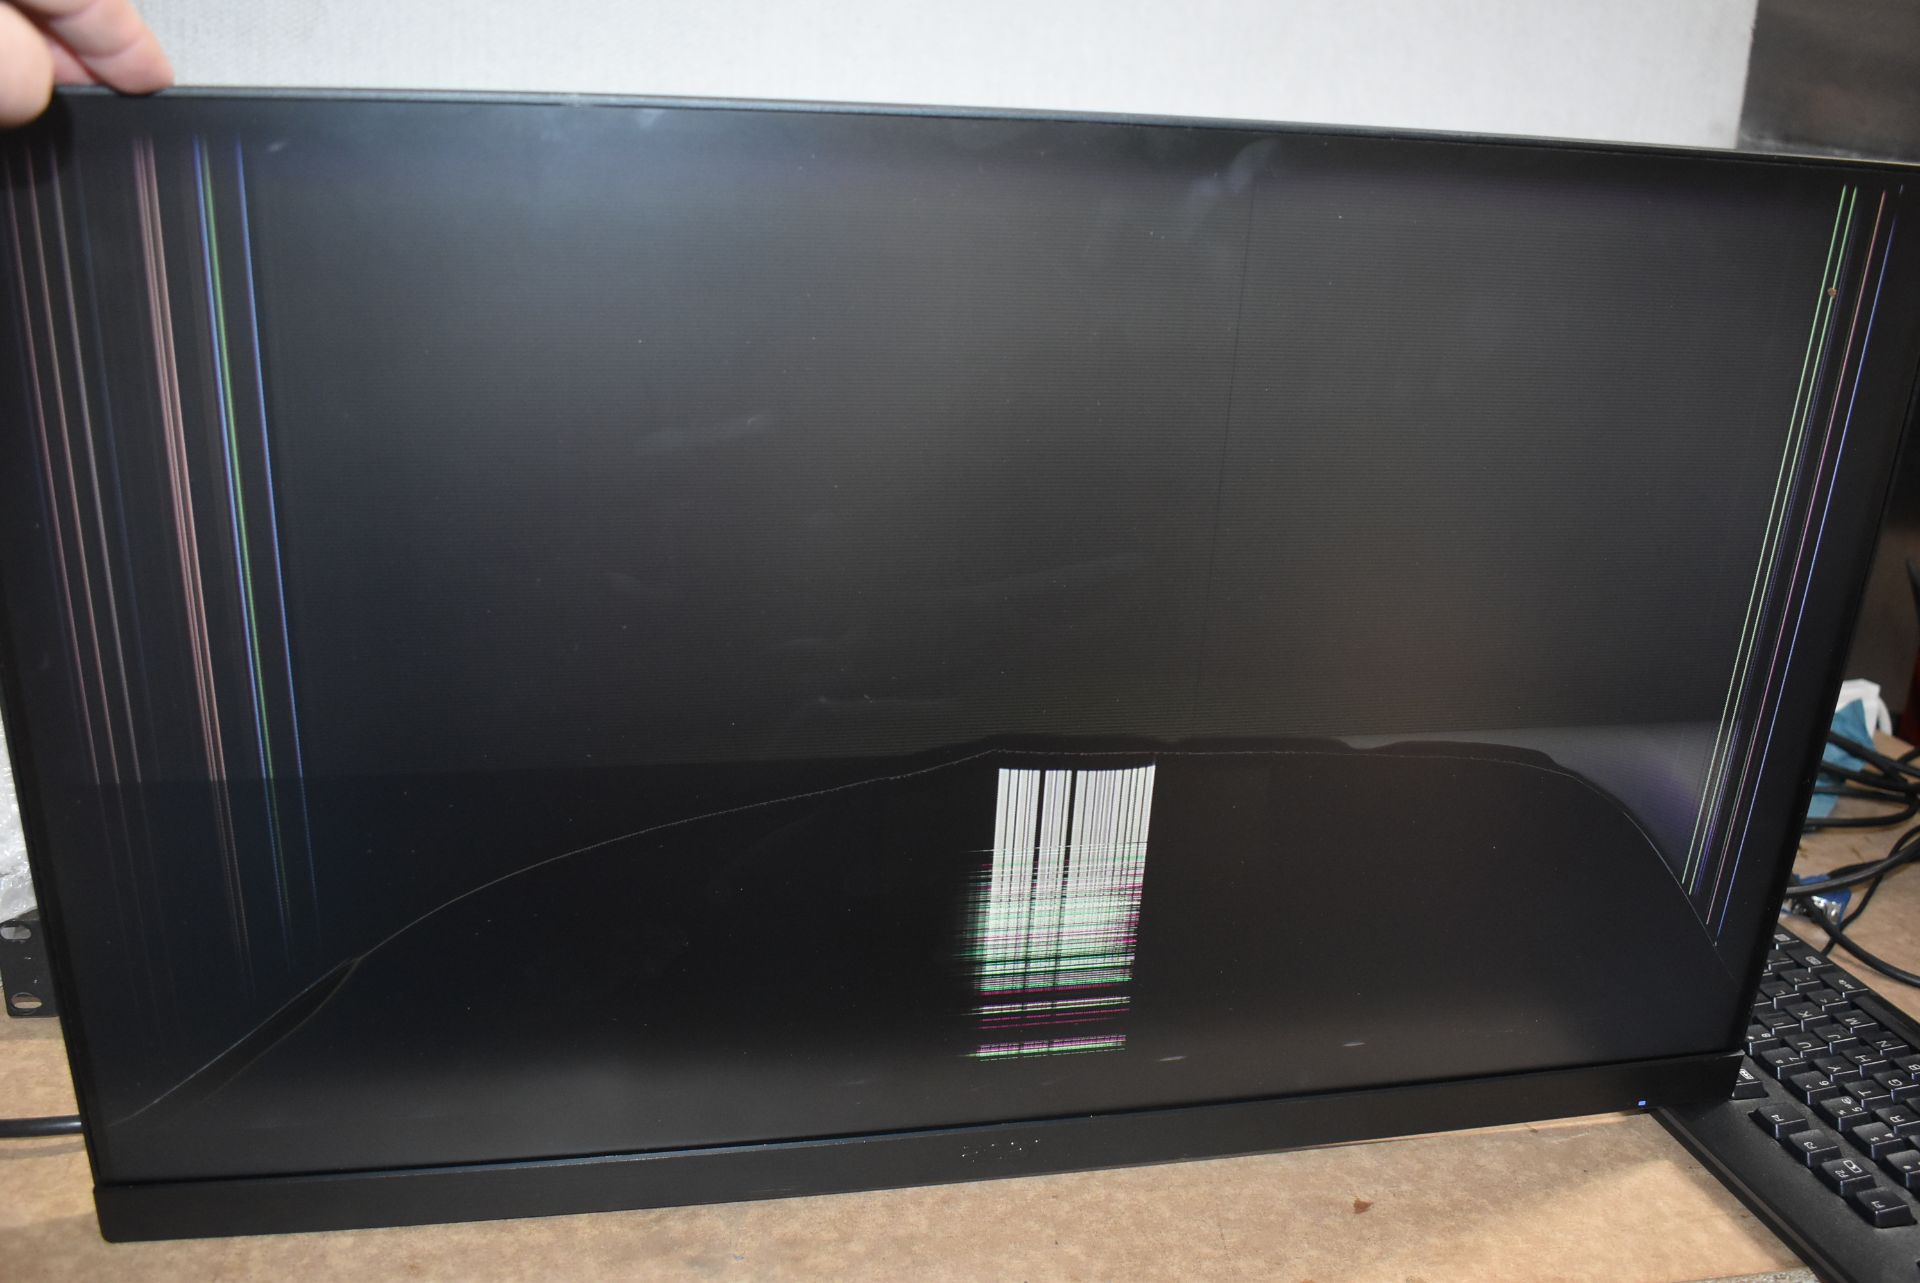 15 x Acer 27 Inch FHD Monitors - Model ET271 - Spares or Repairs With Damaged Screens - Ref: - Image 3 of 22